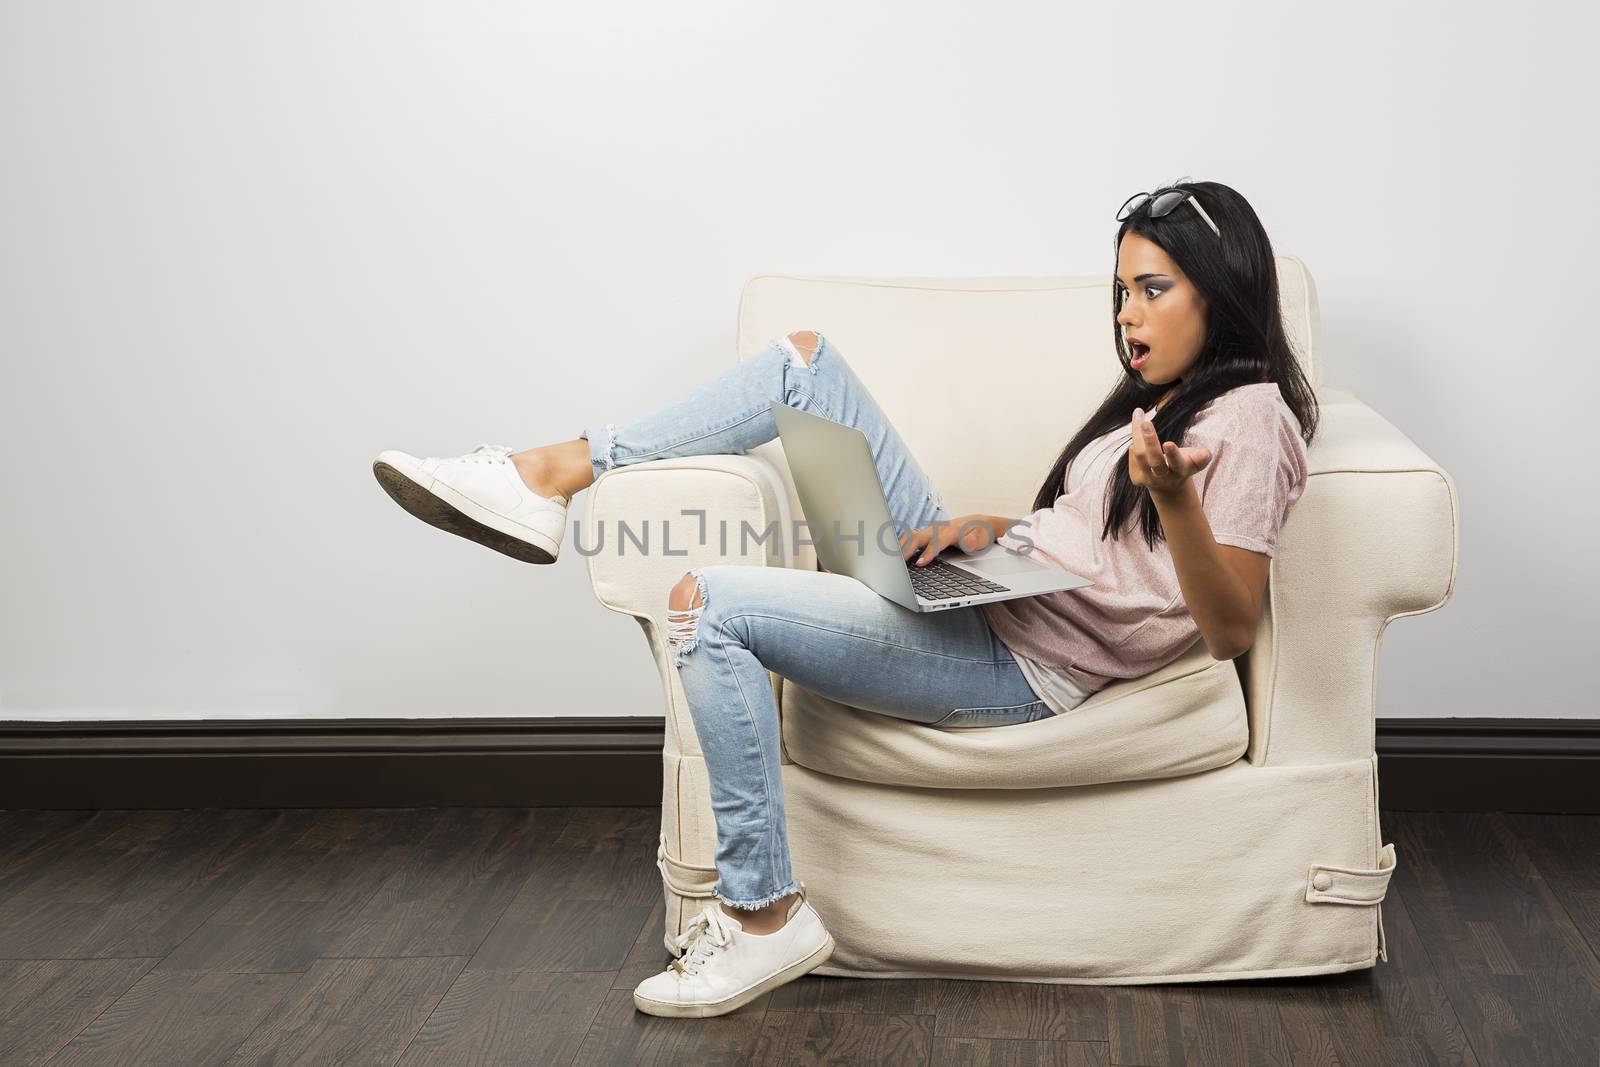 young woman, sitting on a couch, working on a laptop, with an expression of frustration